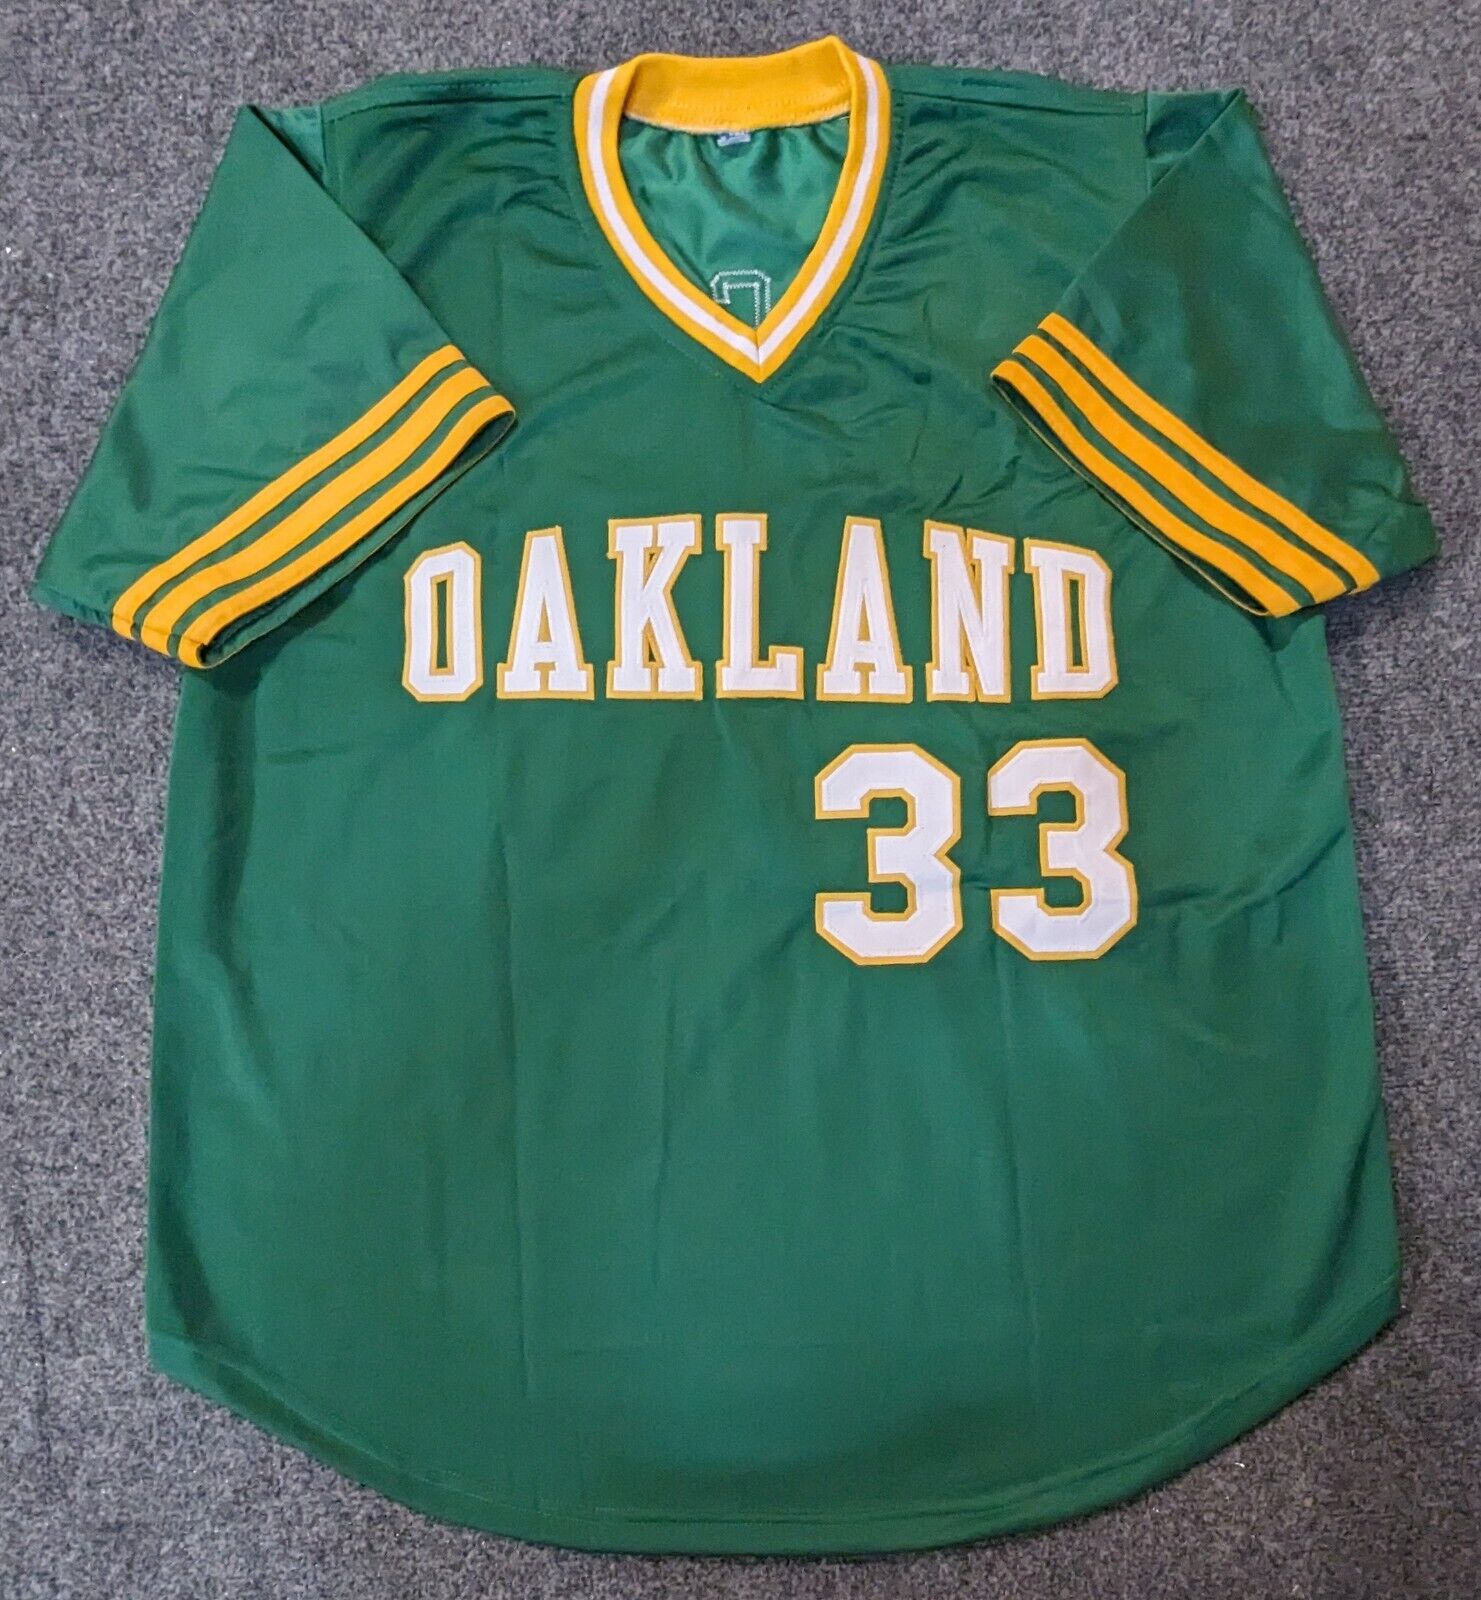 Jose Canseco Autographed and Framed Green Oakland A's Jersey